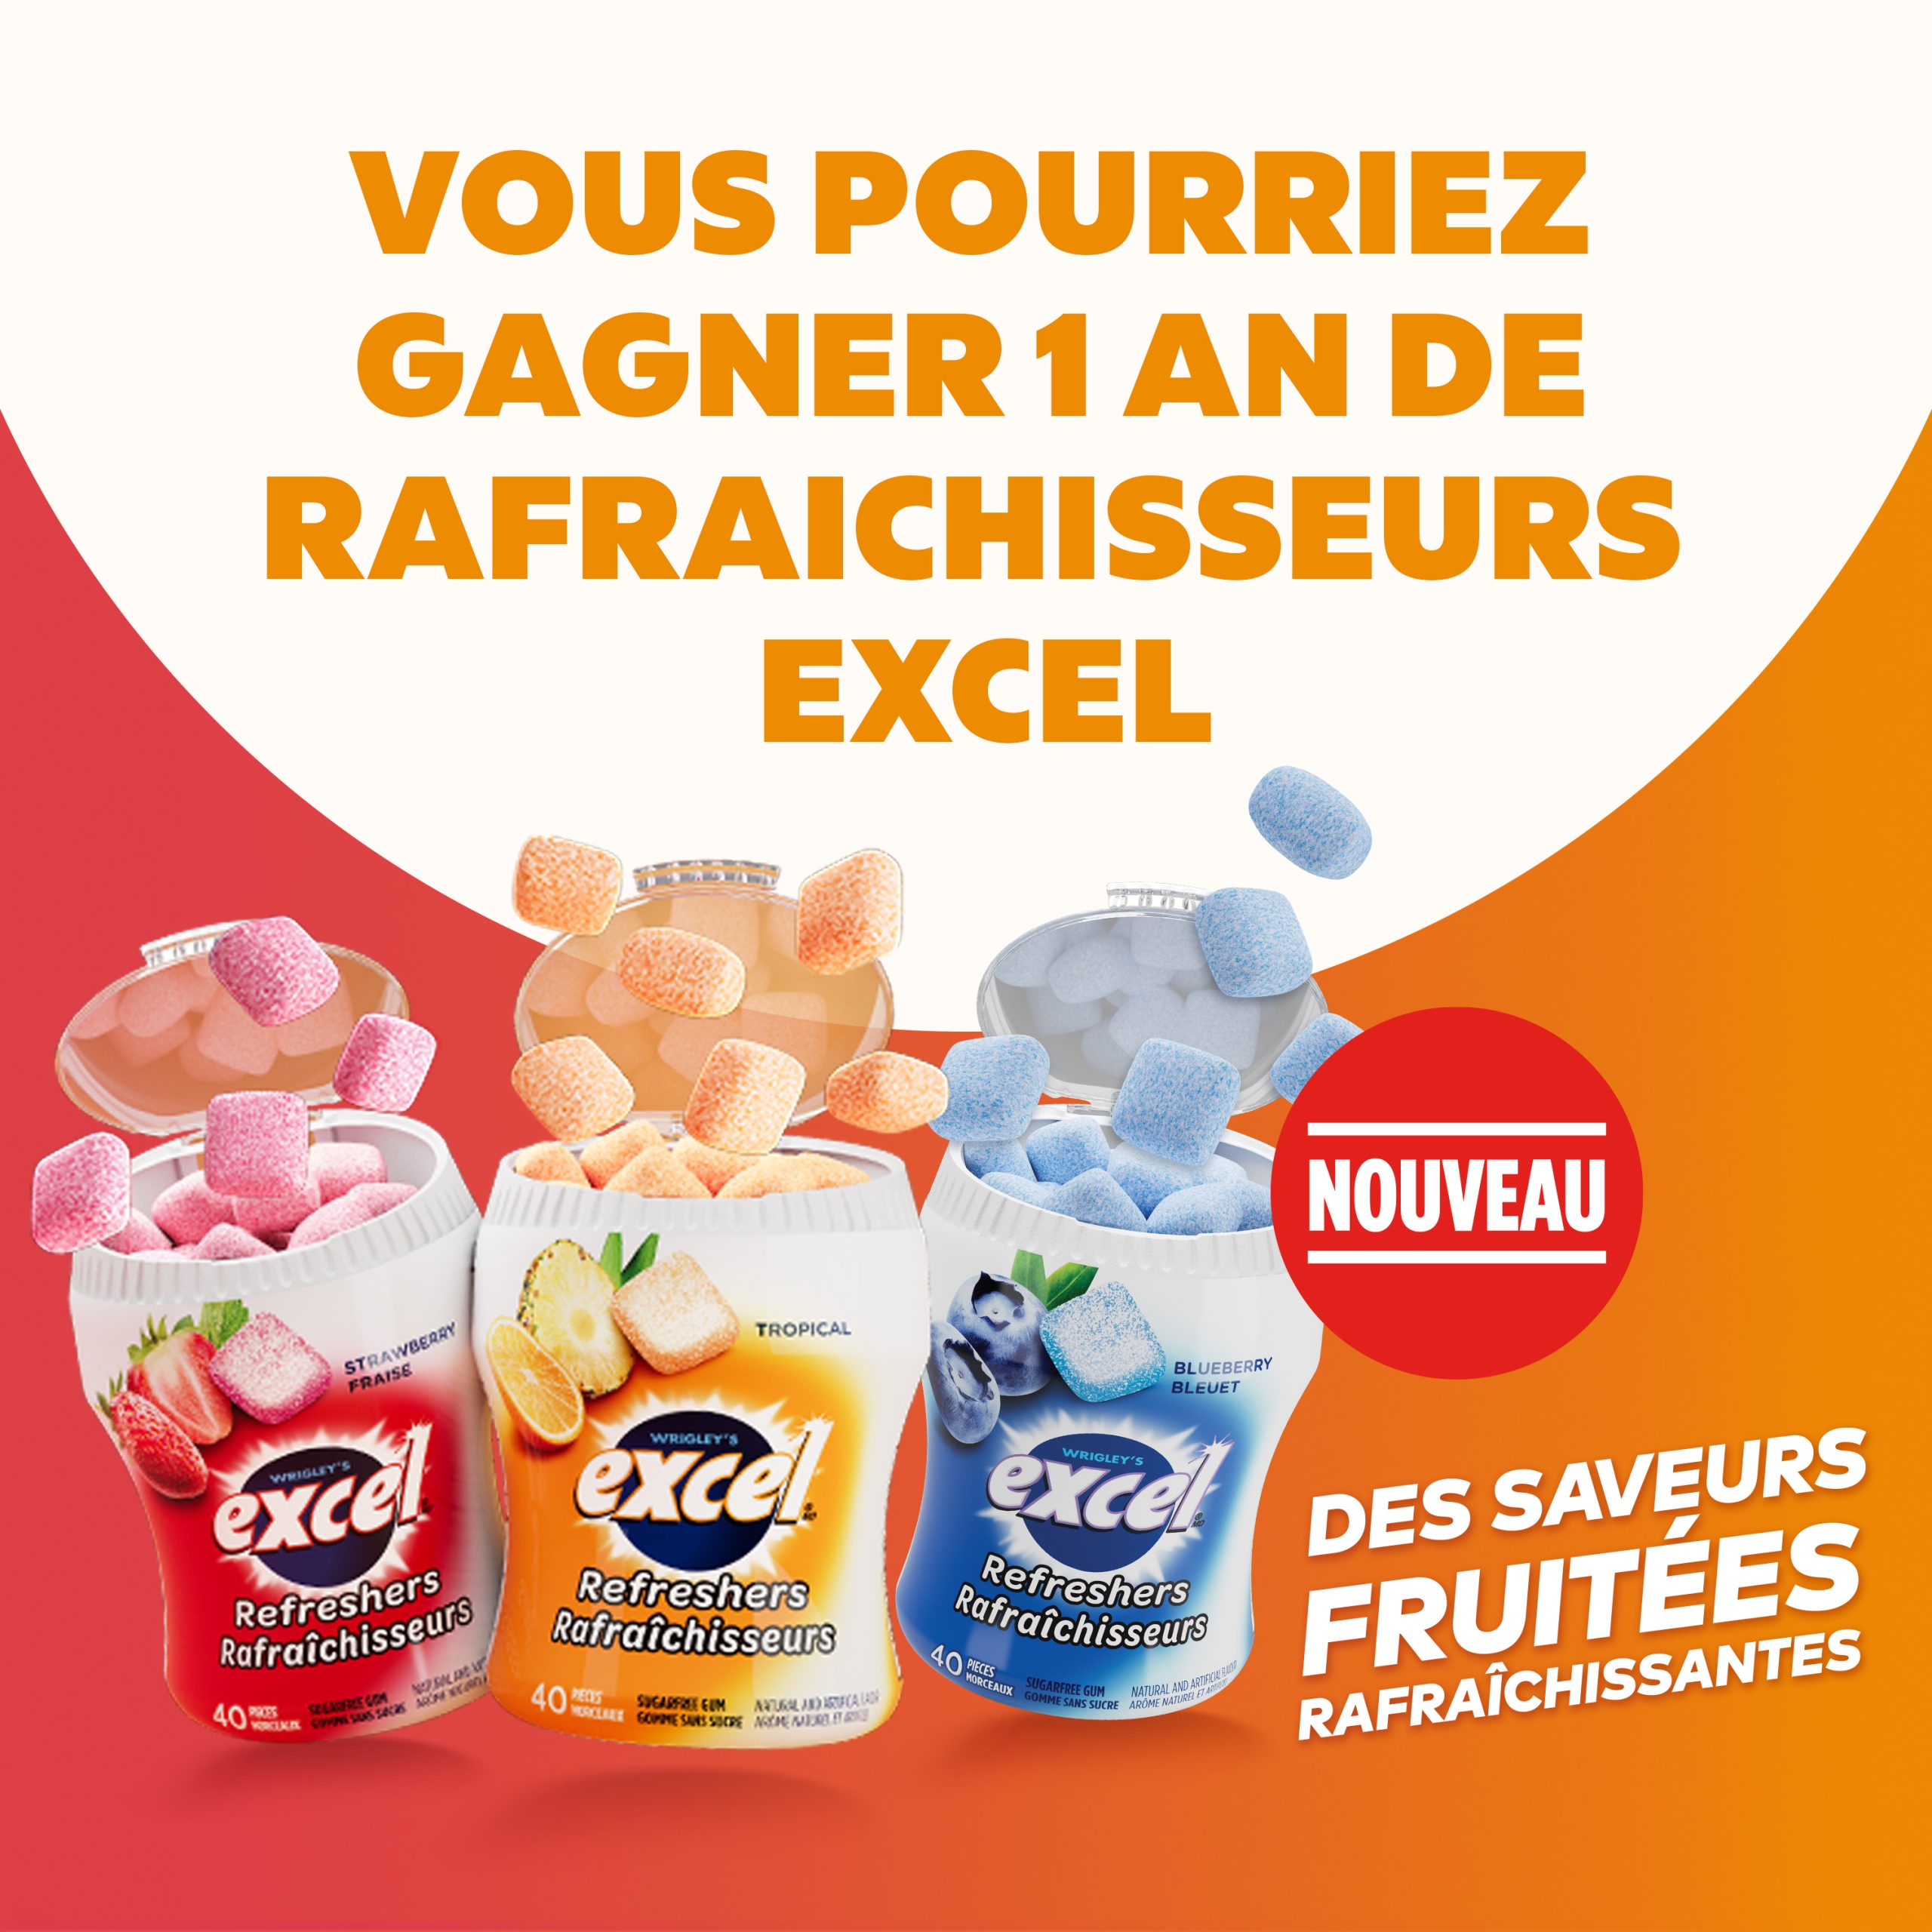 couche-tard-concours